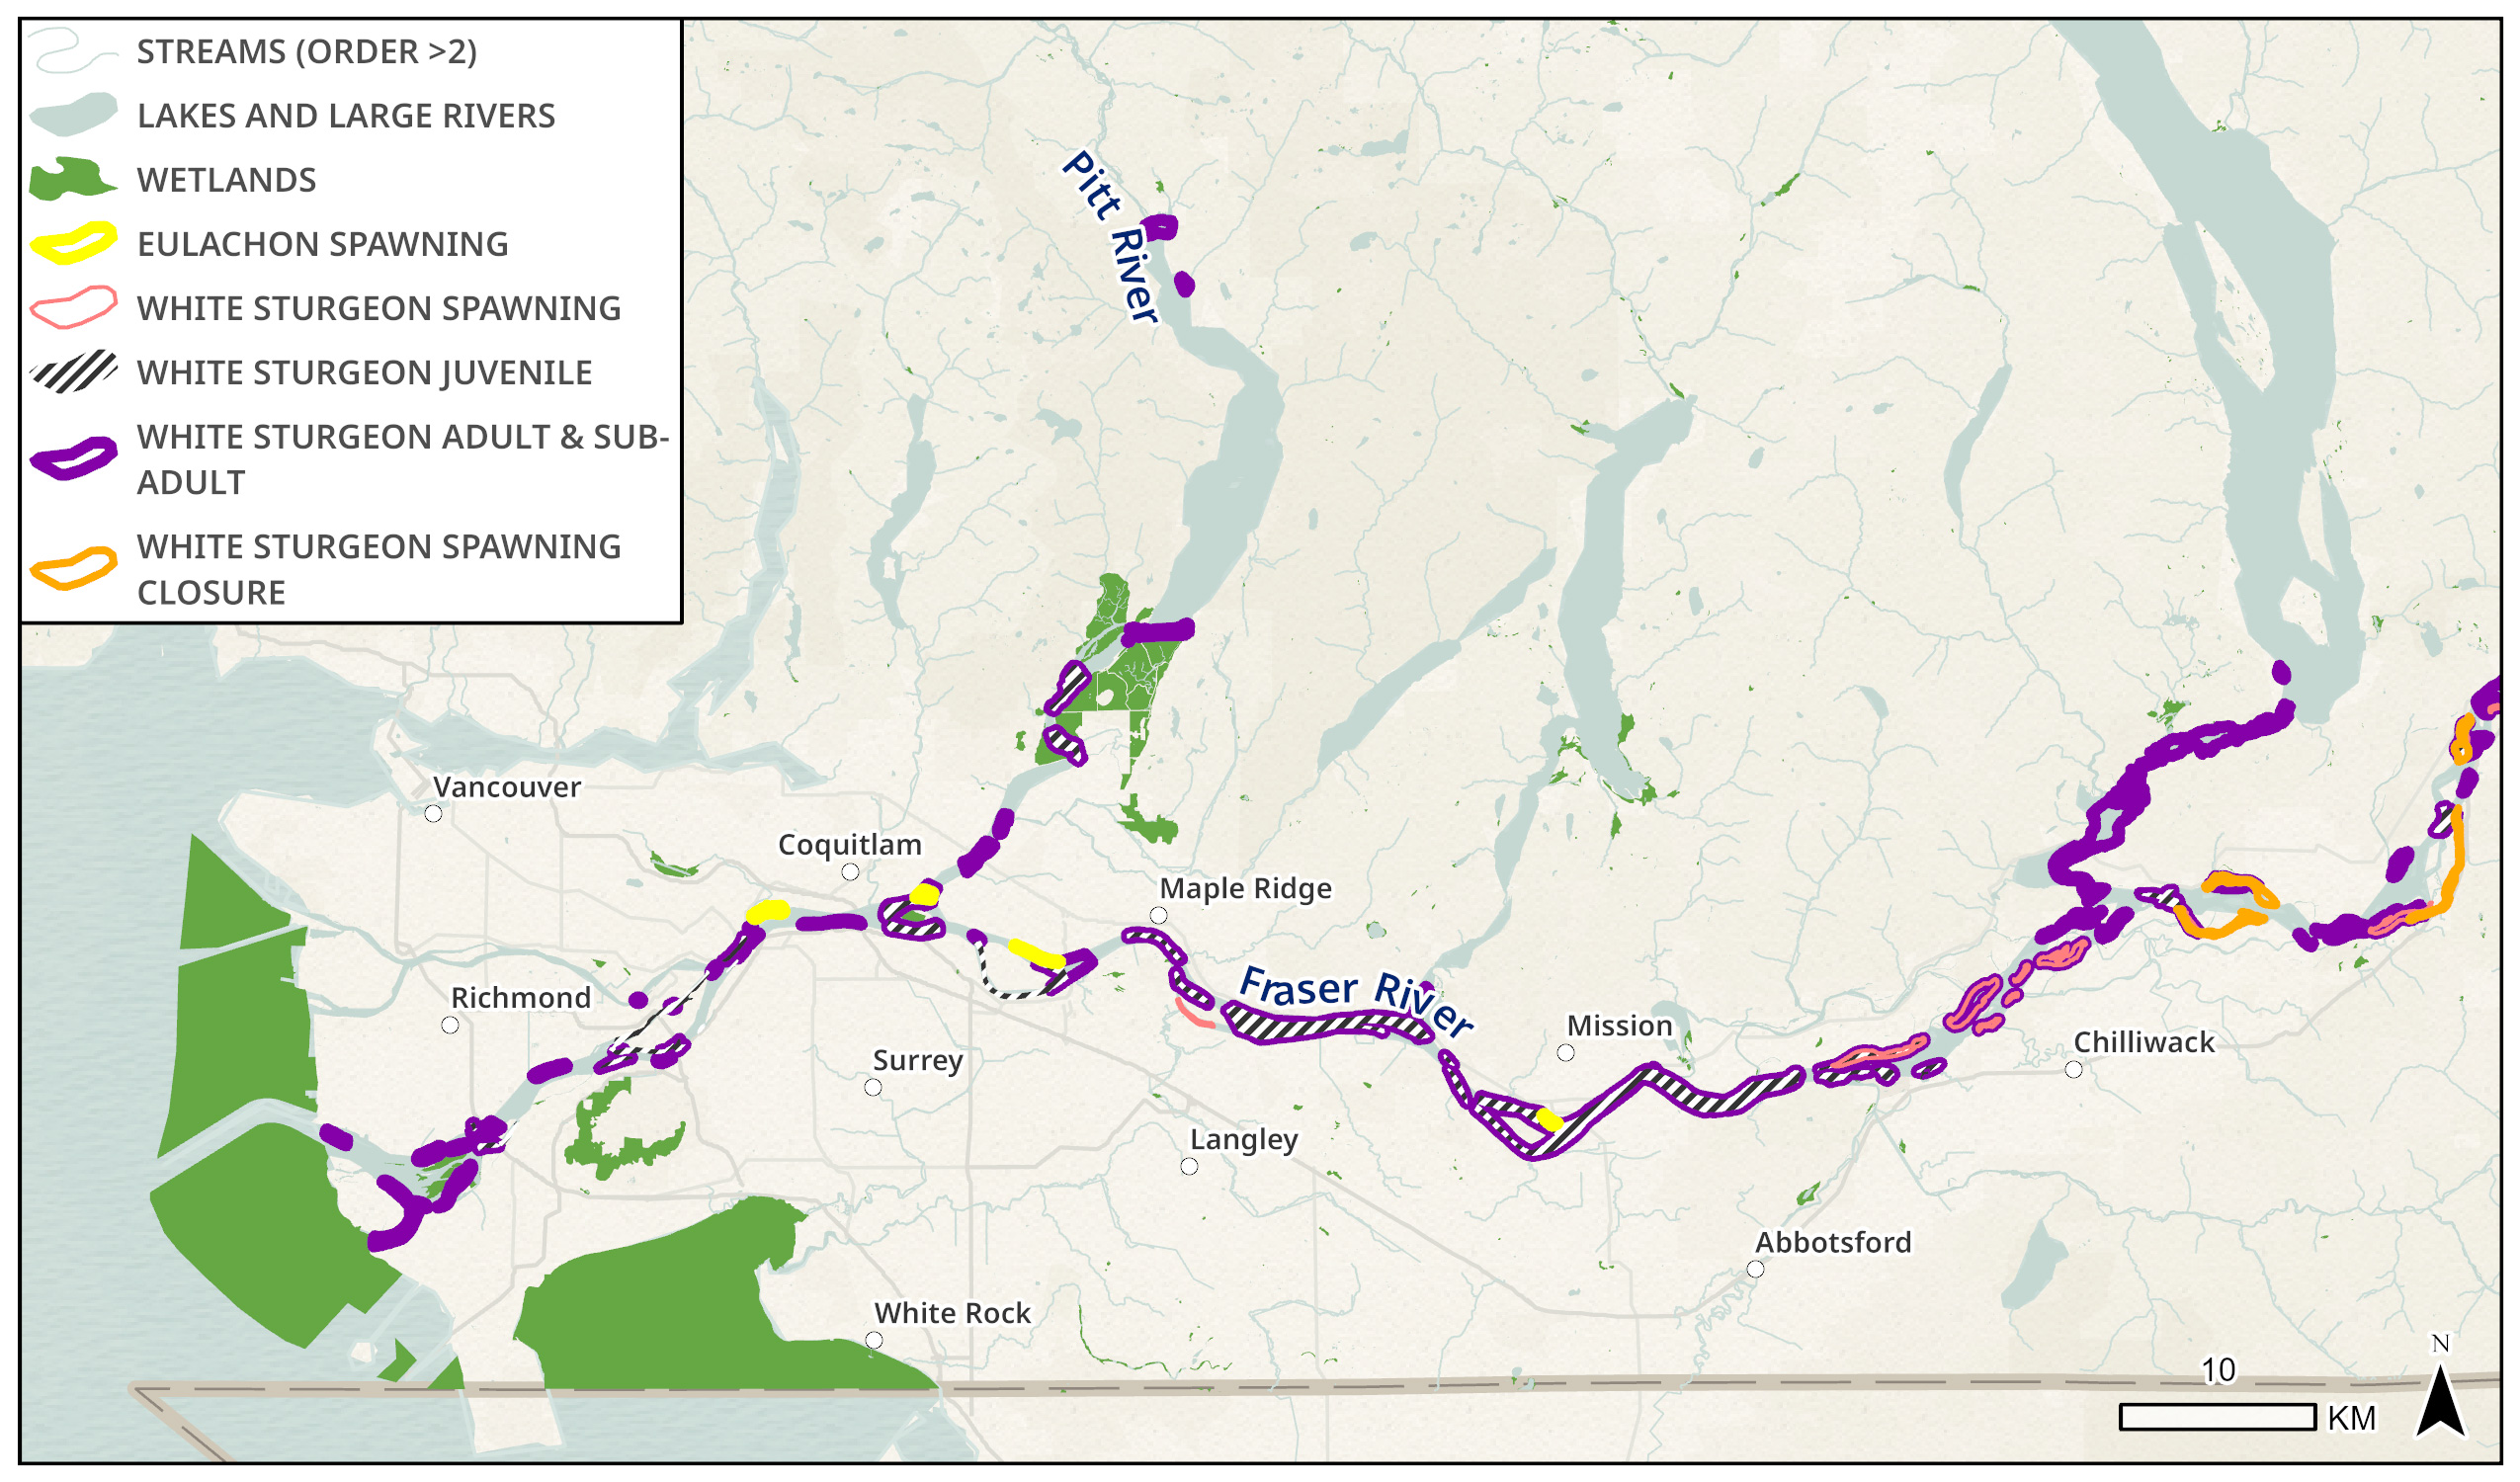 Map showing locations of critical habitat for eulachon and white sturgeon in the Lower Fraser, with shaded areas representing habitats for each species and various cities and towns in the region.